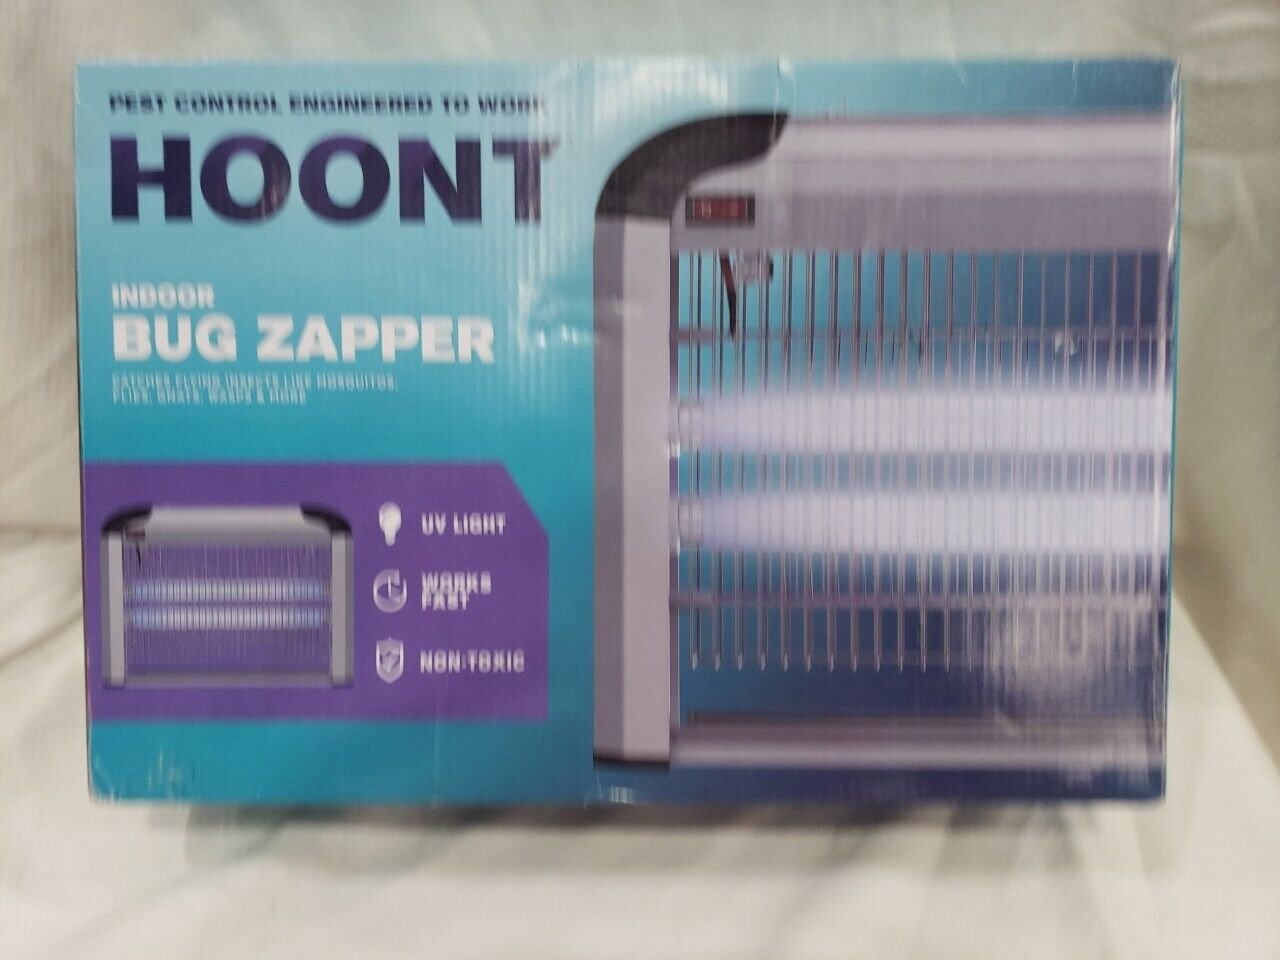 Hoont Electric Indoor Fly Zapper and Bug Zapper Trap Killer Catcher – Protects